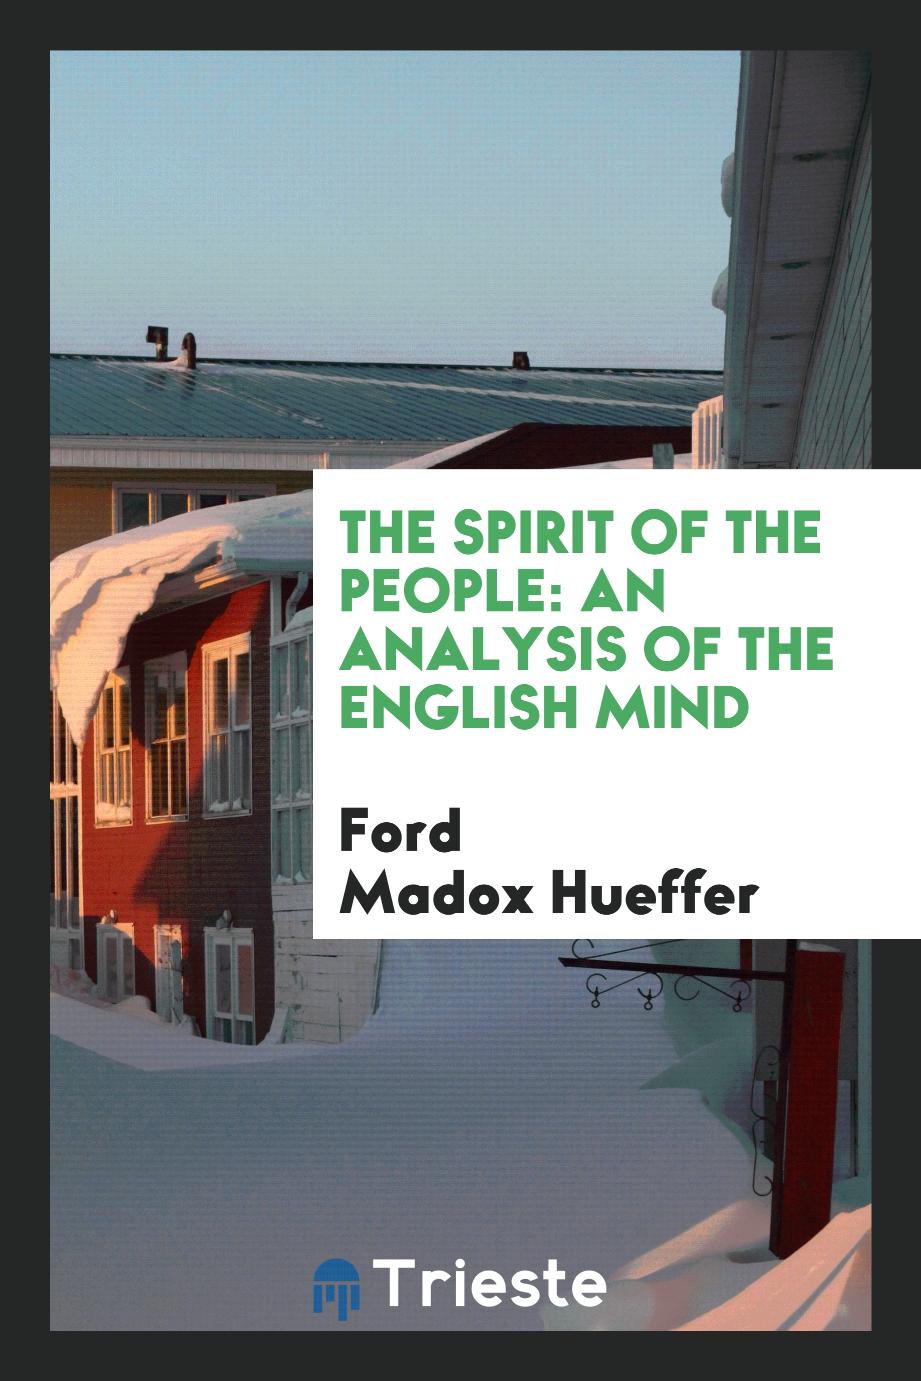 The Spirit of the People: An Analysis of the English Mind